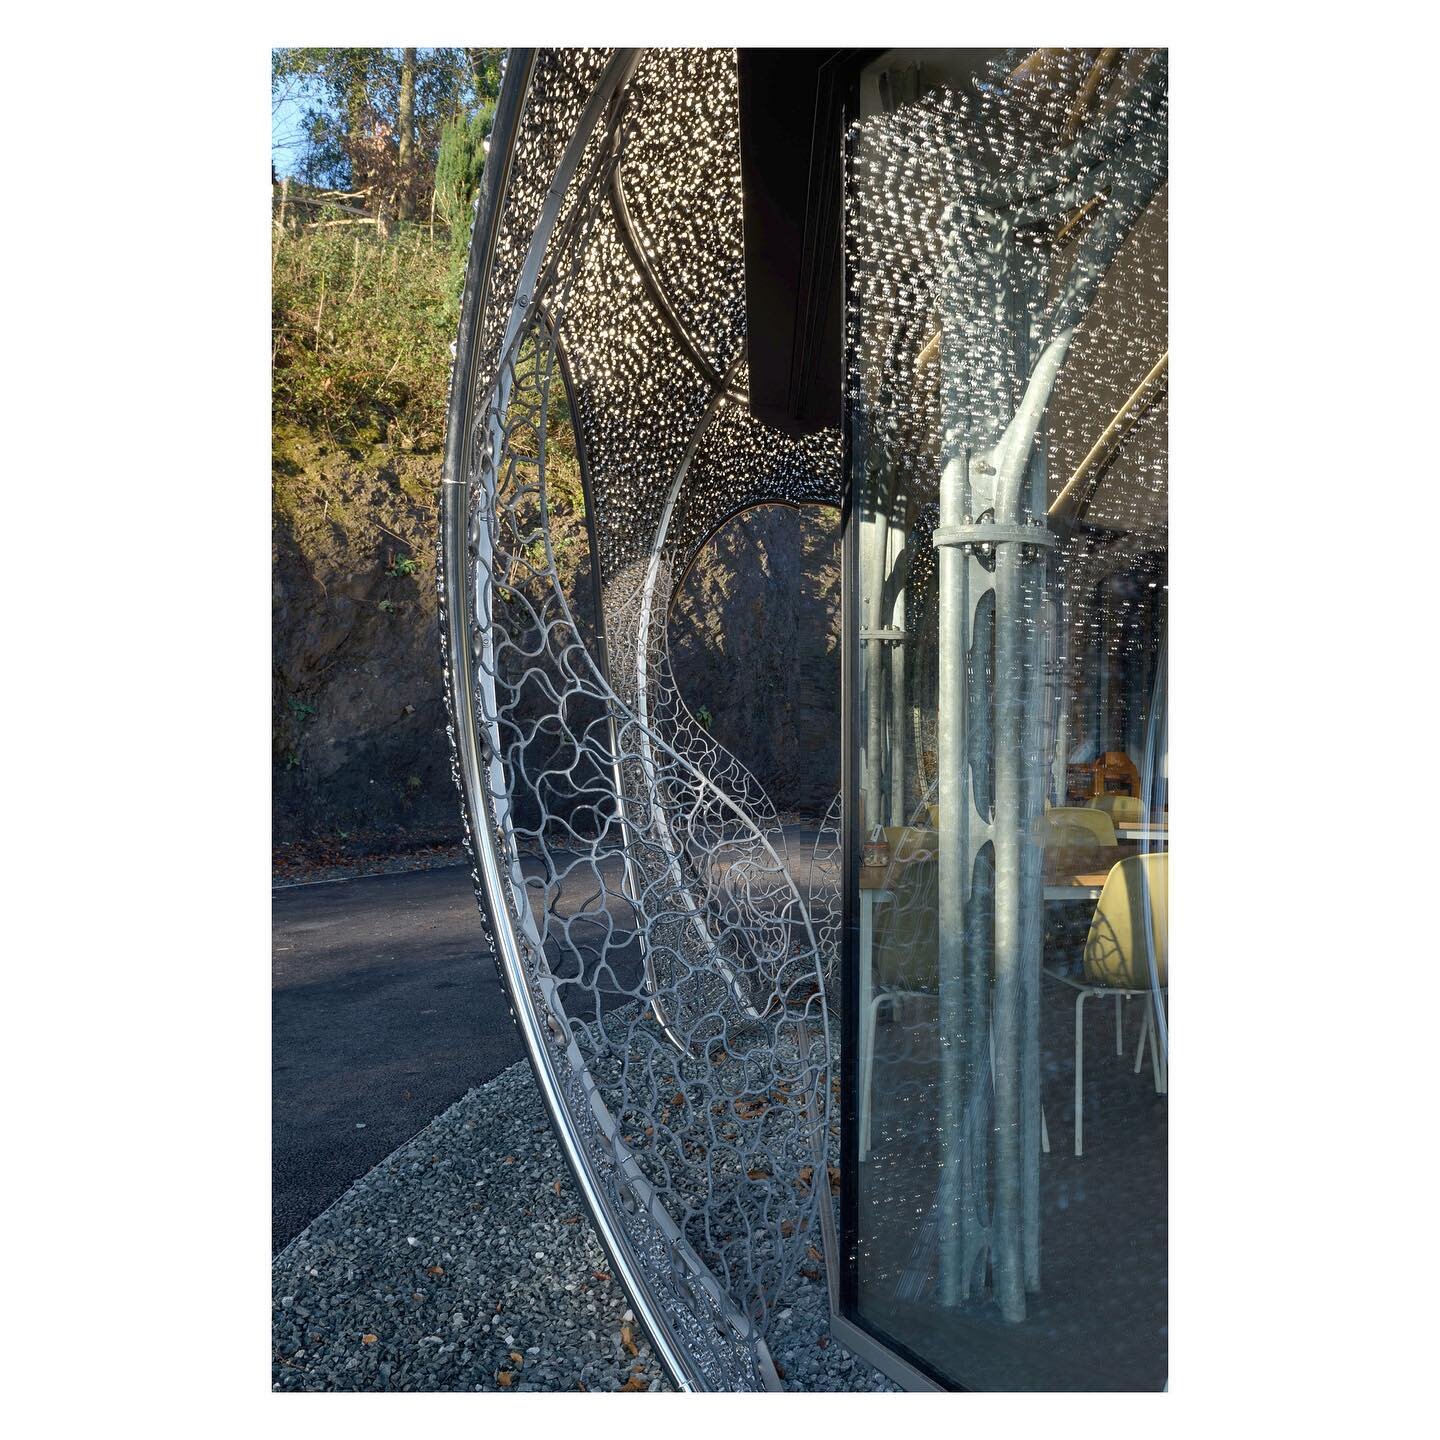 | Oriel Plas Glyn-y-Weddw

The outer shell of the new cafe at @orielplasglynyweddw is made of 89,000 individual stainless steel barnacles secured into welded sections which are supported off the weathertight structure below. This create a permeable l